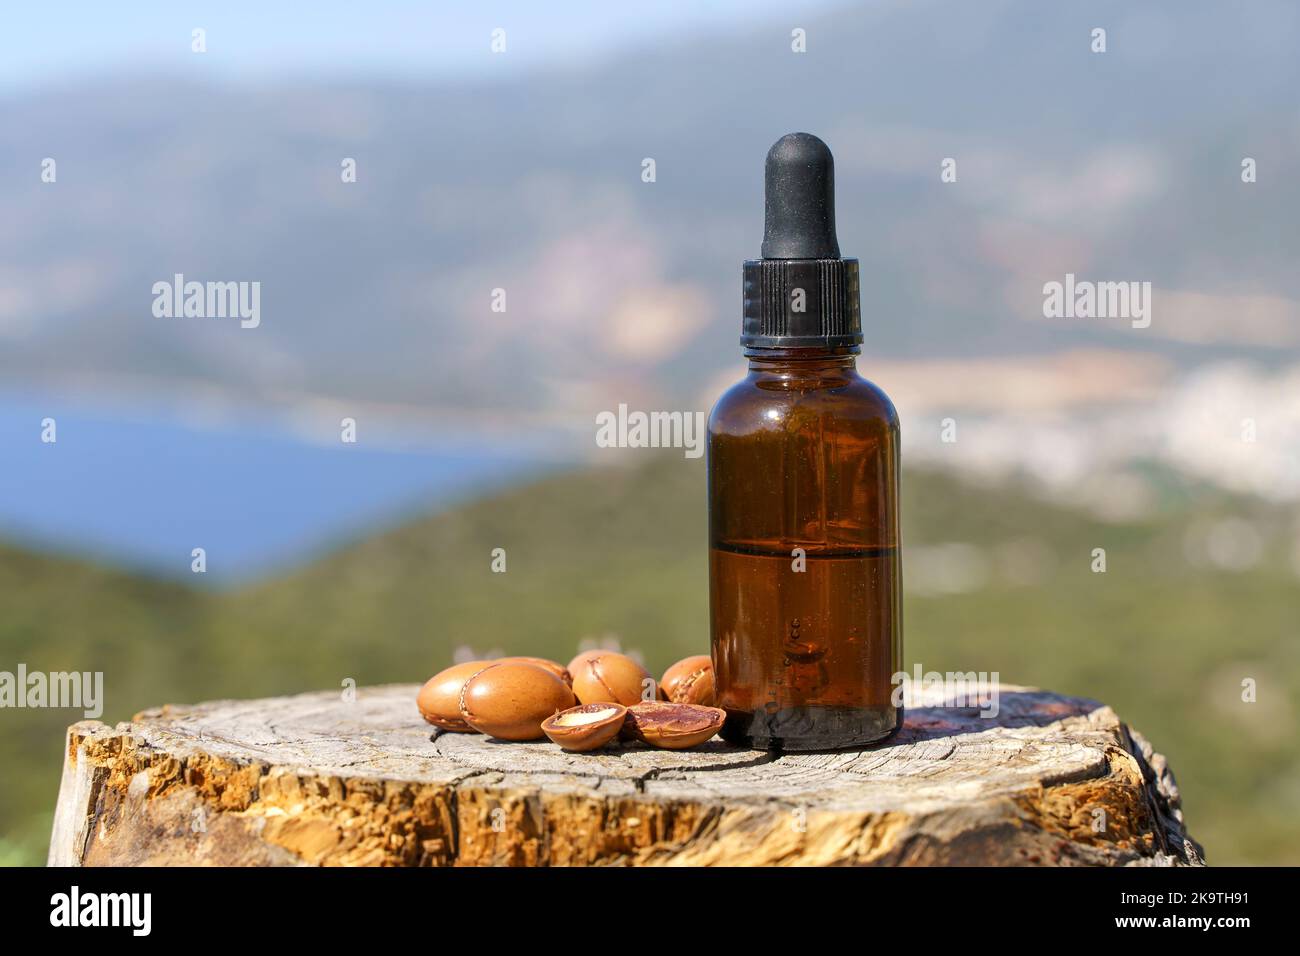 Argan seeds and oil on nature wooden background. Organic argan oil for nature cosmetics for skin, hair, massage. Morocco natural bio beauty products. High quality photo Stock Photo